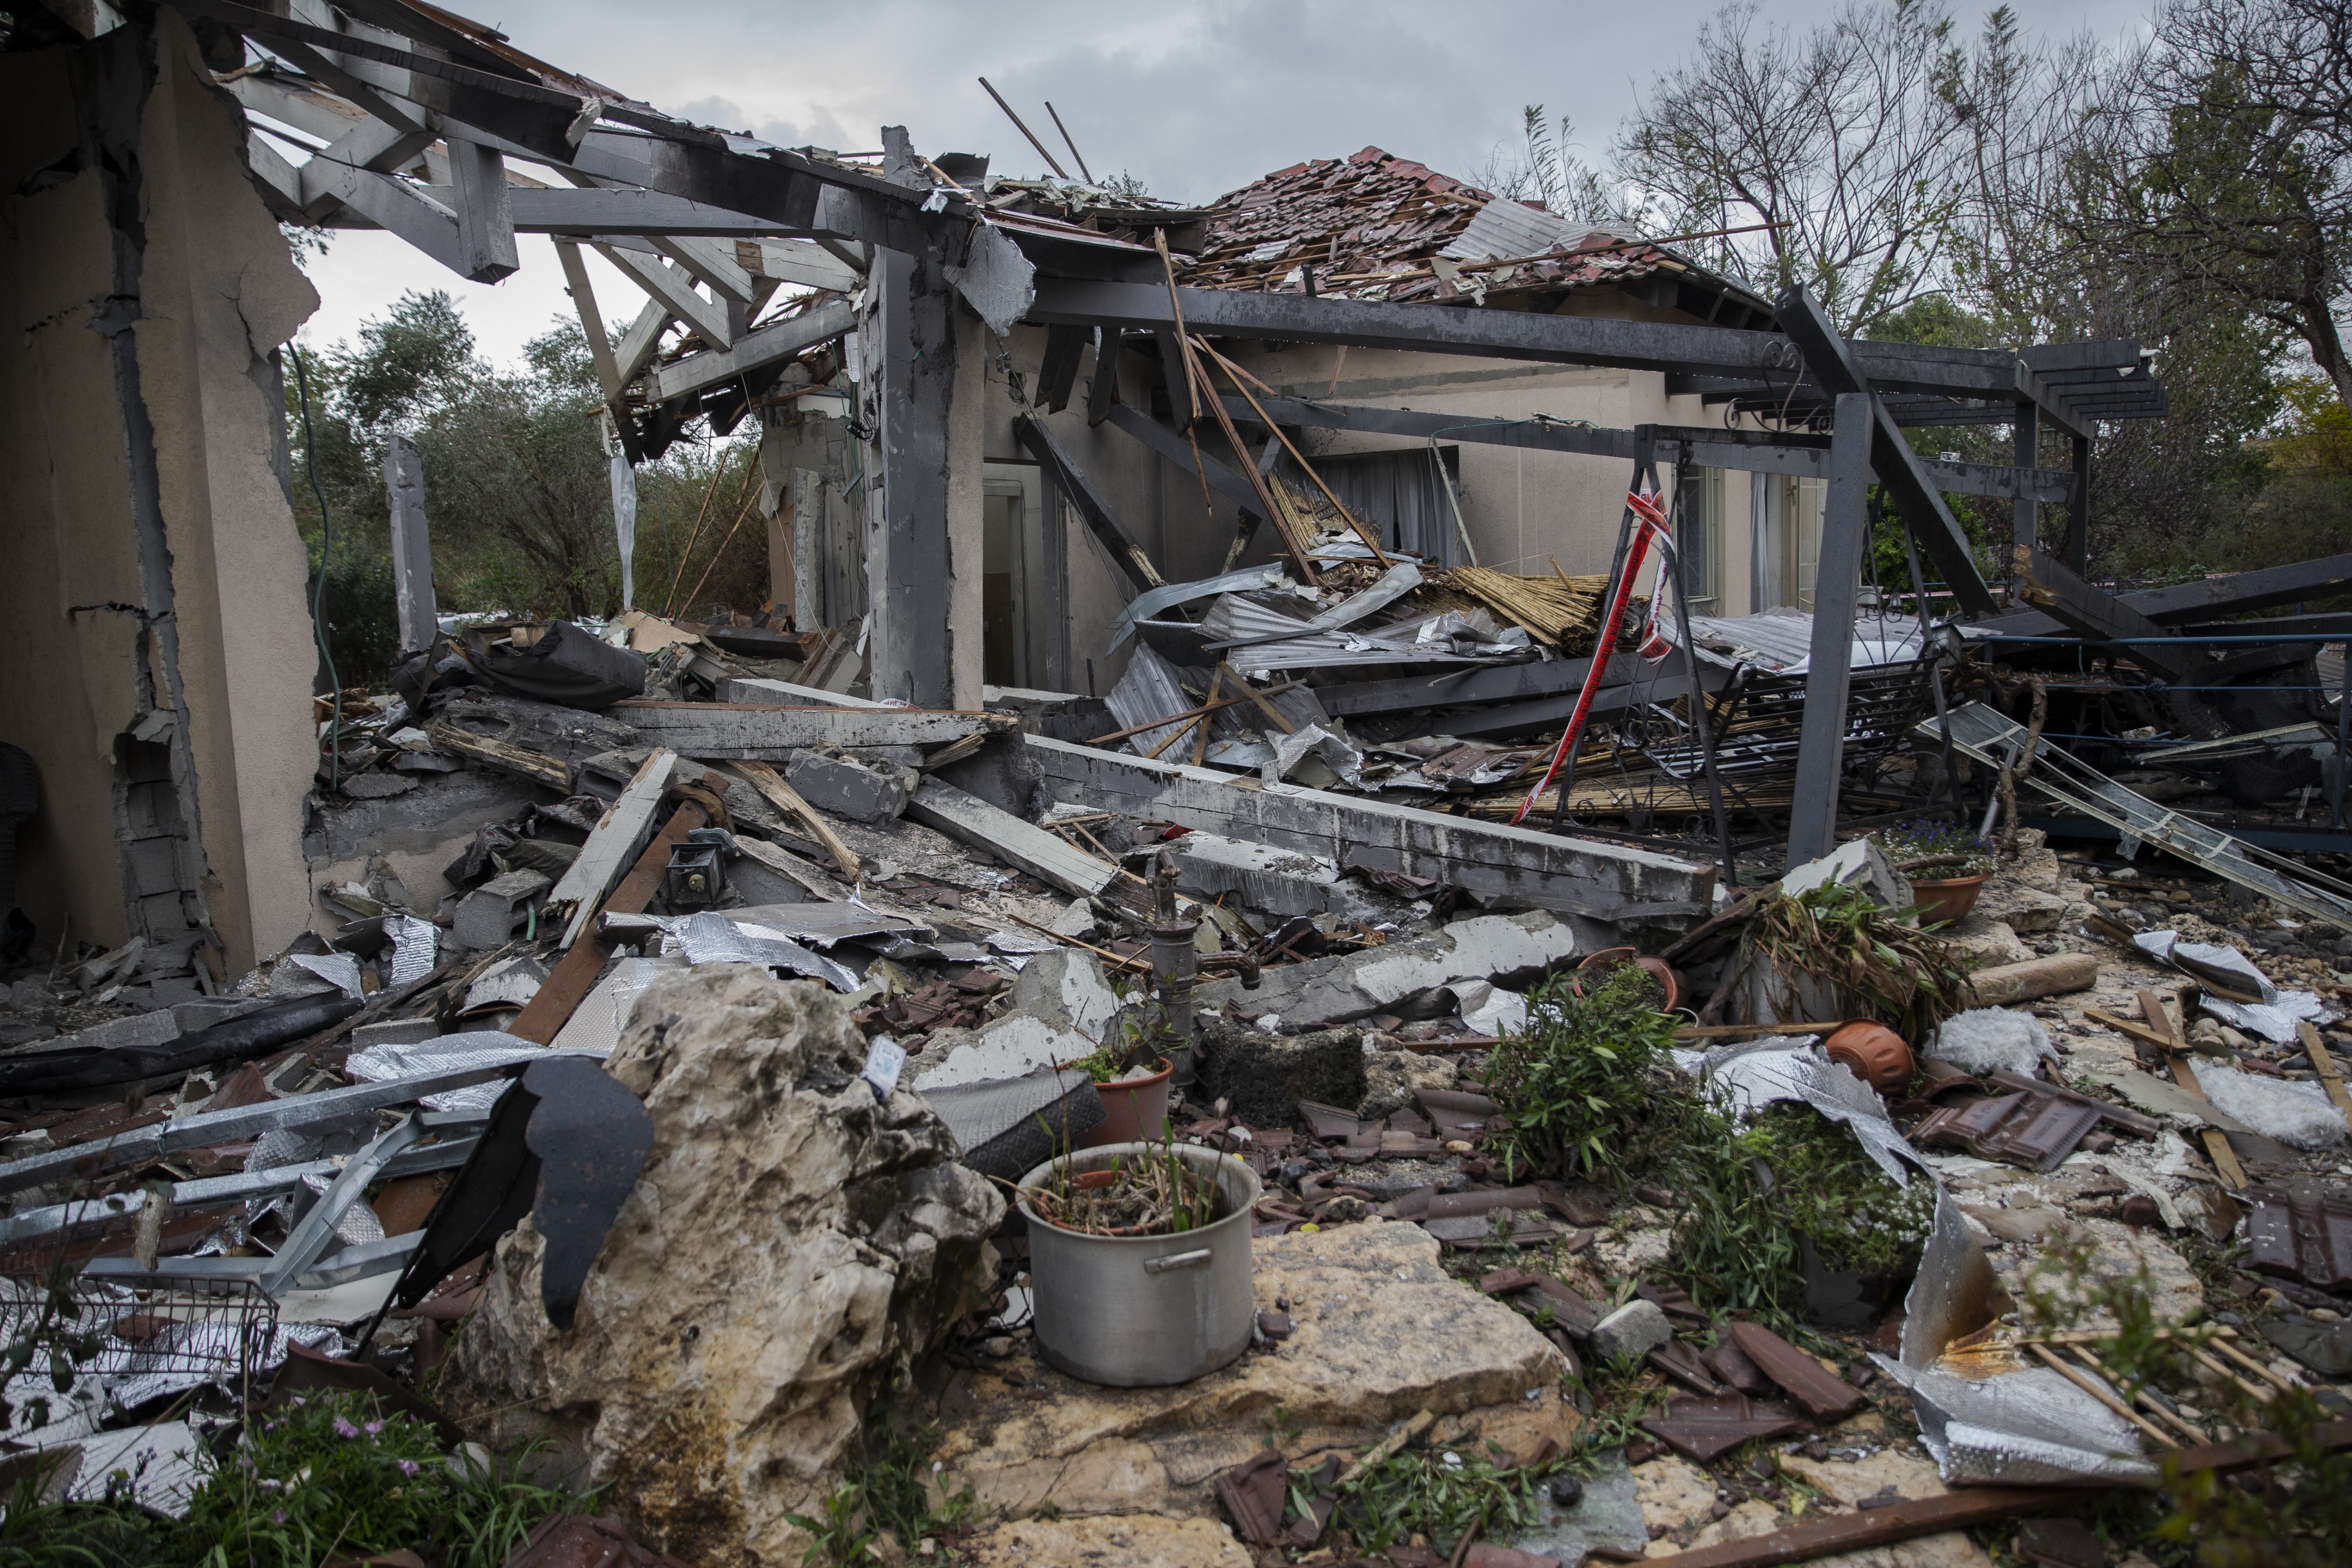 Damaged houses are seen after a rocket hit the village of Mishmeret on March 25, 2019. Seven Israelis were reportedly injured in rocket fire from the Gaza Strip. (Faiz Abu Rmeleh—Anadolu Agency/Getty Images)